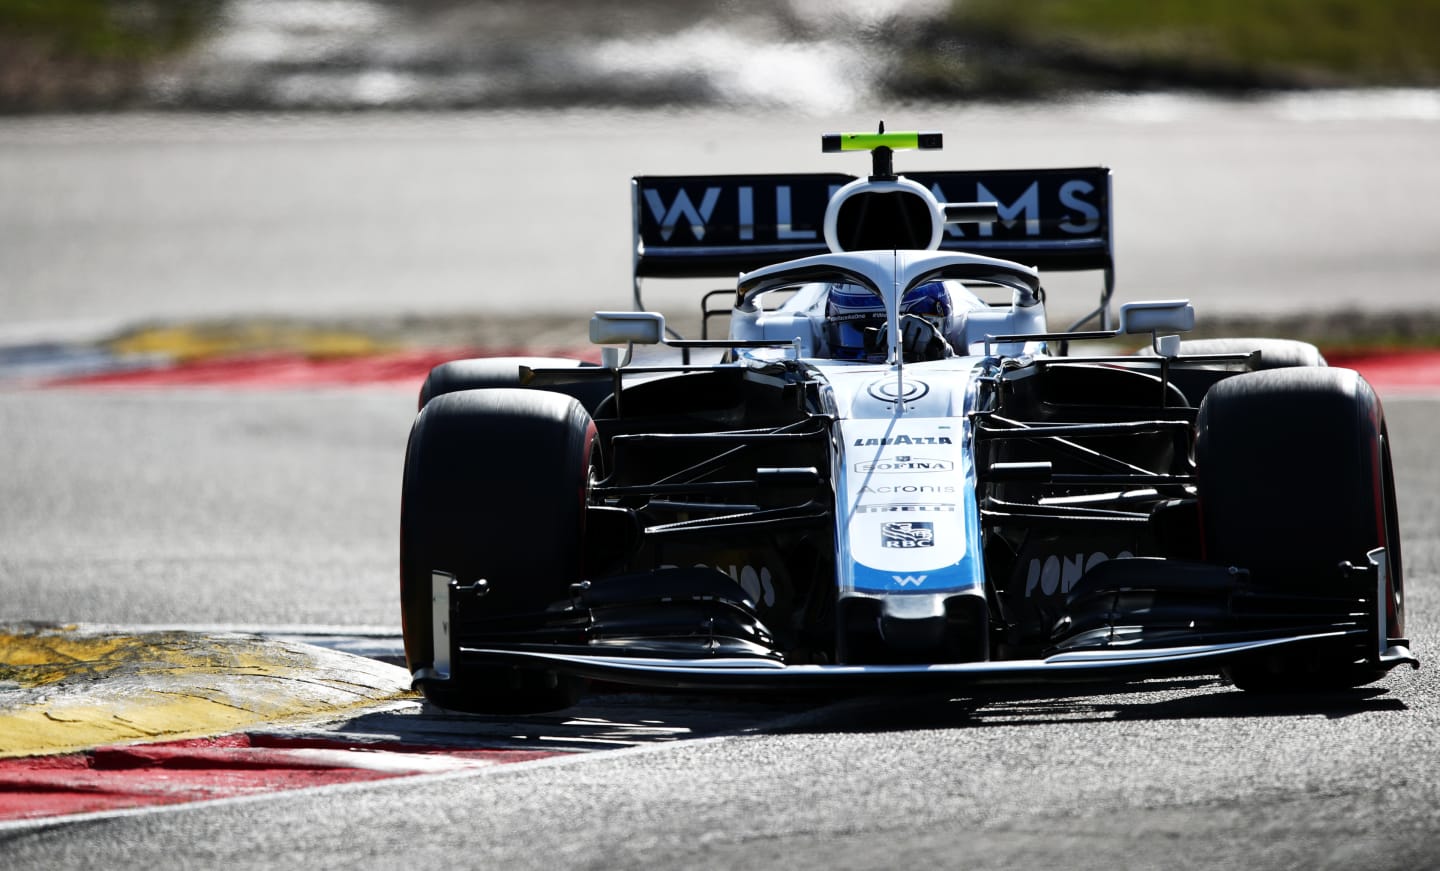 NUERBURG, GERMANY - OCTOBER 10: Nicholas Latifi of Canada driving the (6) Williams Racing FW43 Mercedes on track during qualifying ahead of the F1 Eifel Grand Prix at Nuerburgring on October 10, 2020 in Nuerburg, Germany. (Photo by Joe Portlock/Getty Images)